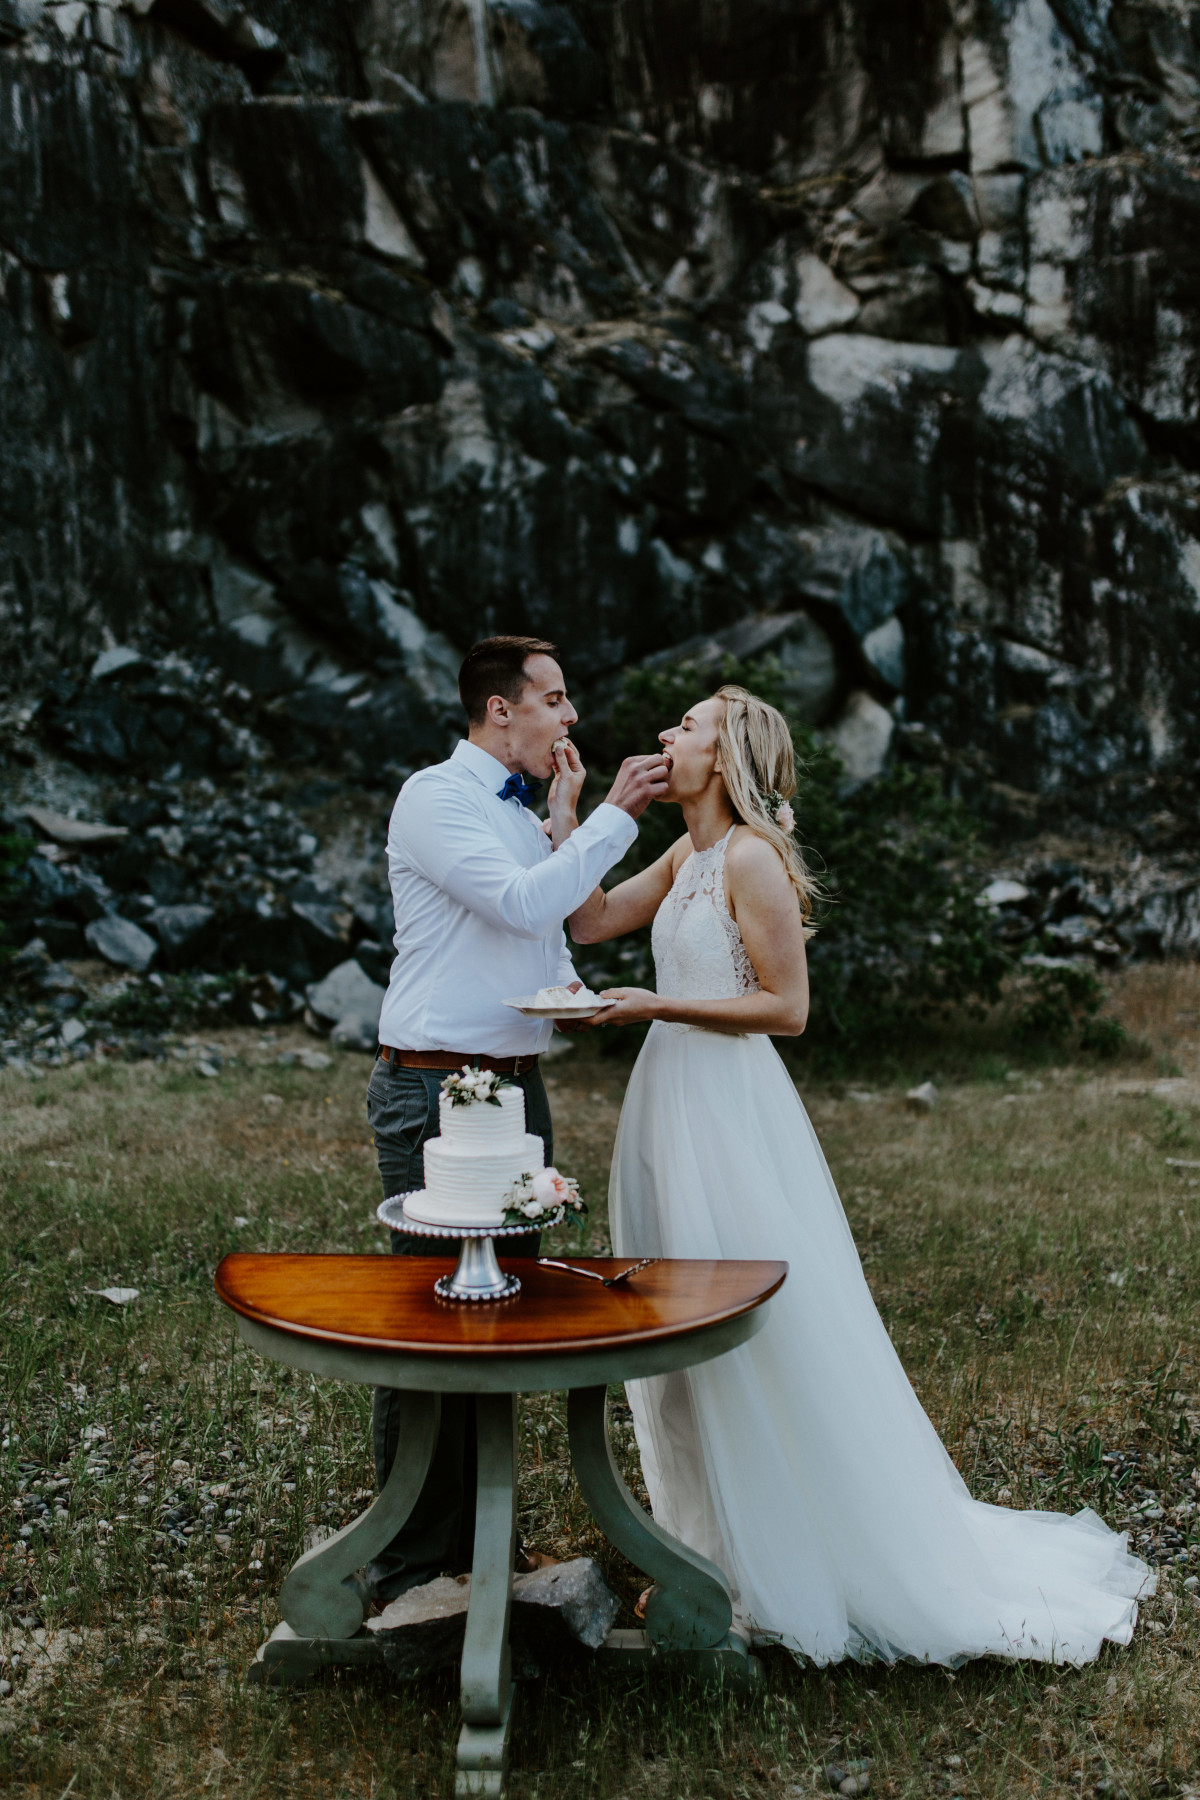 Harper and Trevor feed eachother wedding gake at Cascade Locks at the Columbia Gorge, Oregon. Elopement photography in Portland Oregon by Sienna Plus Josh.